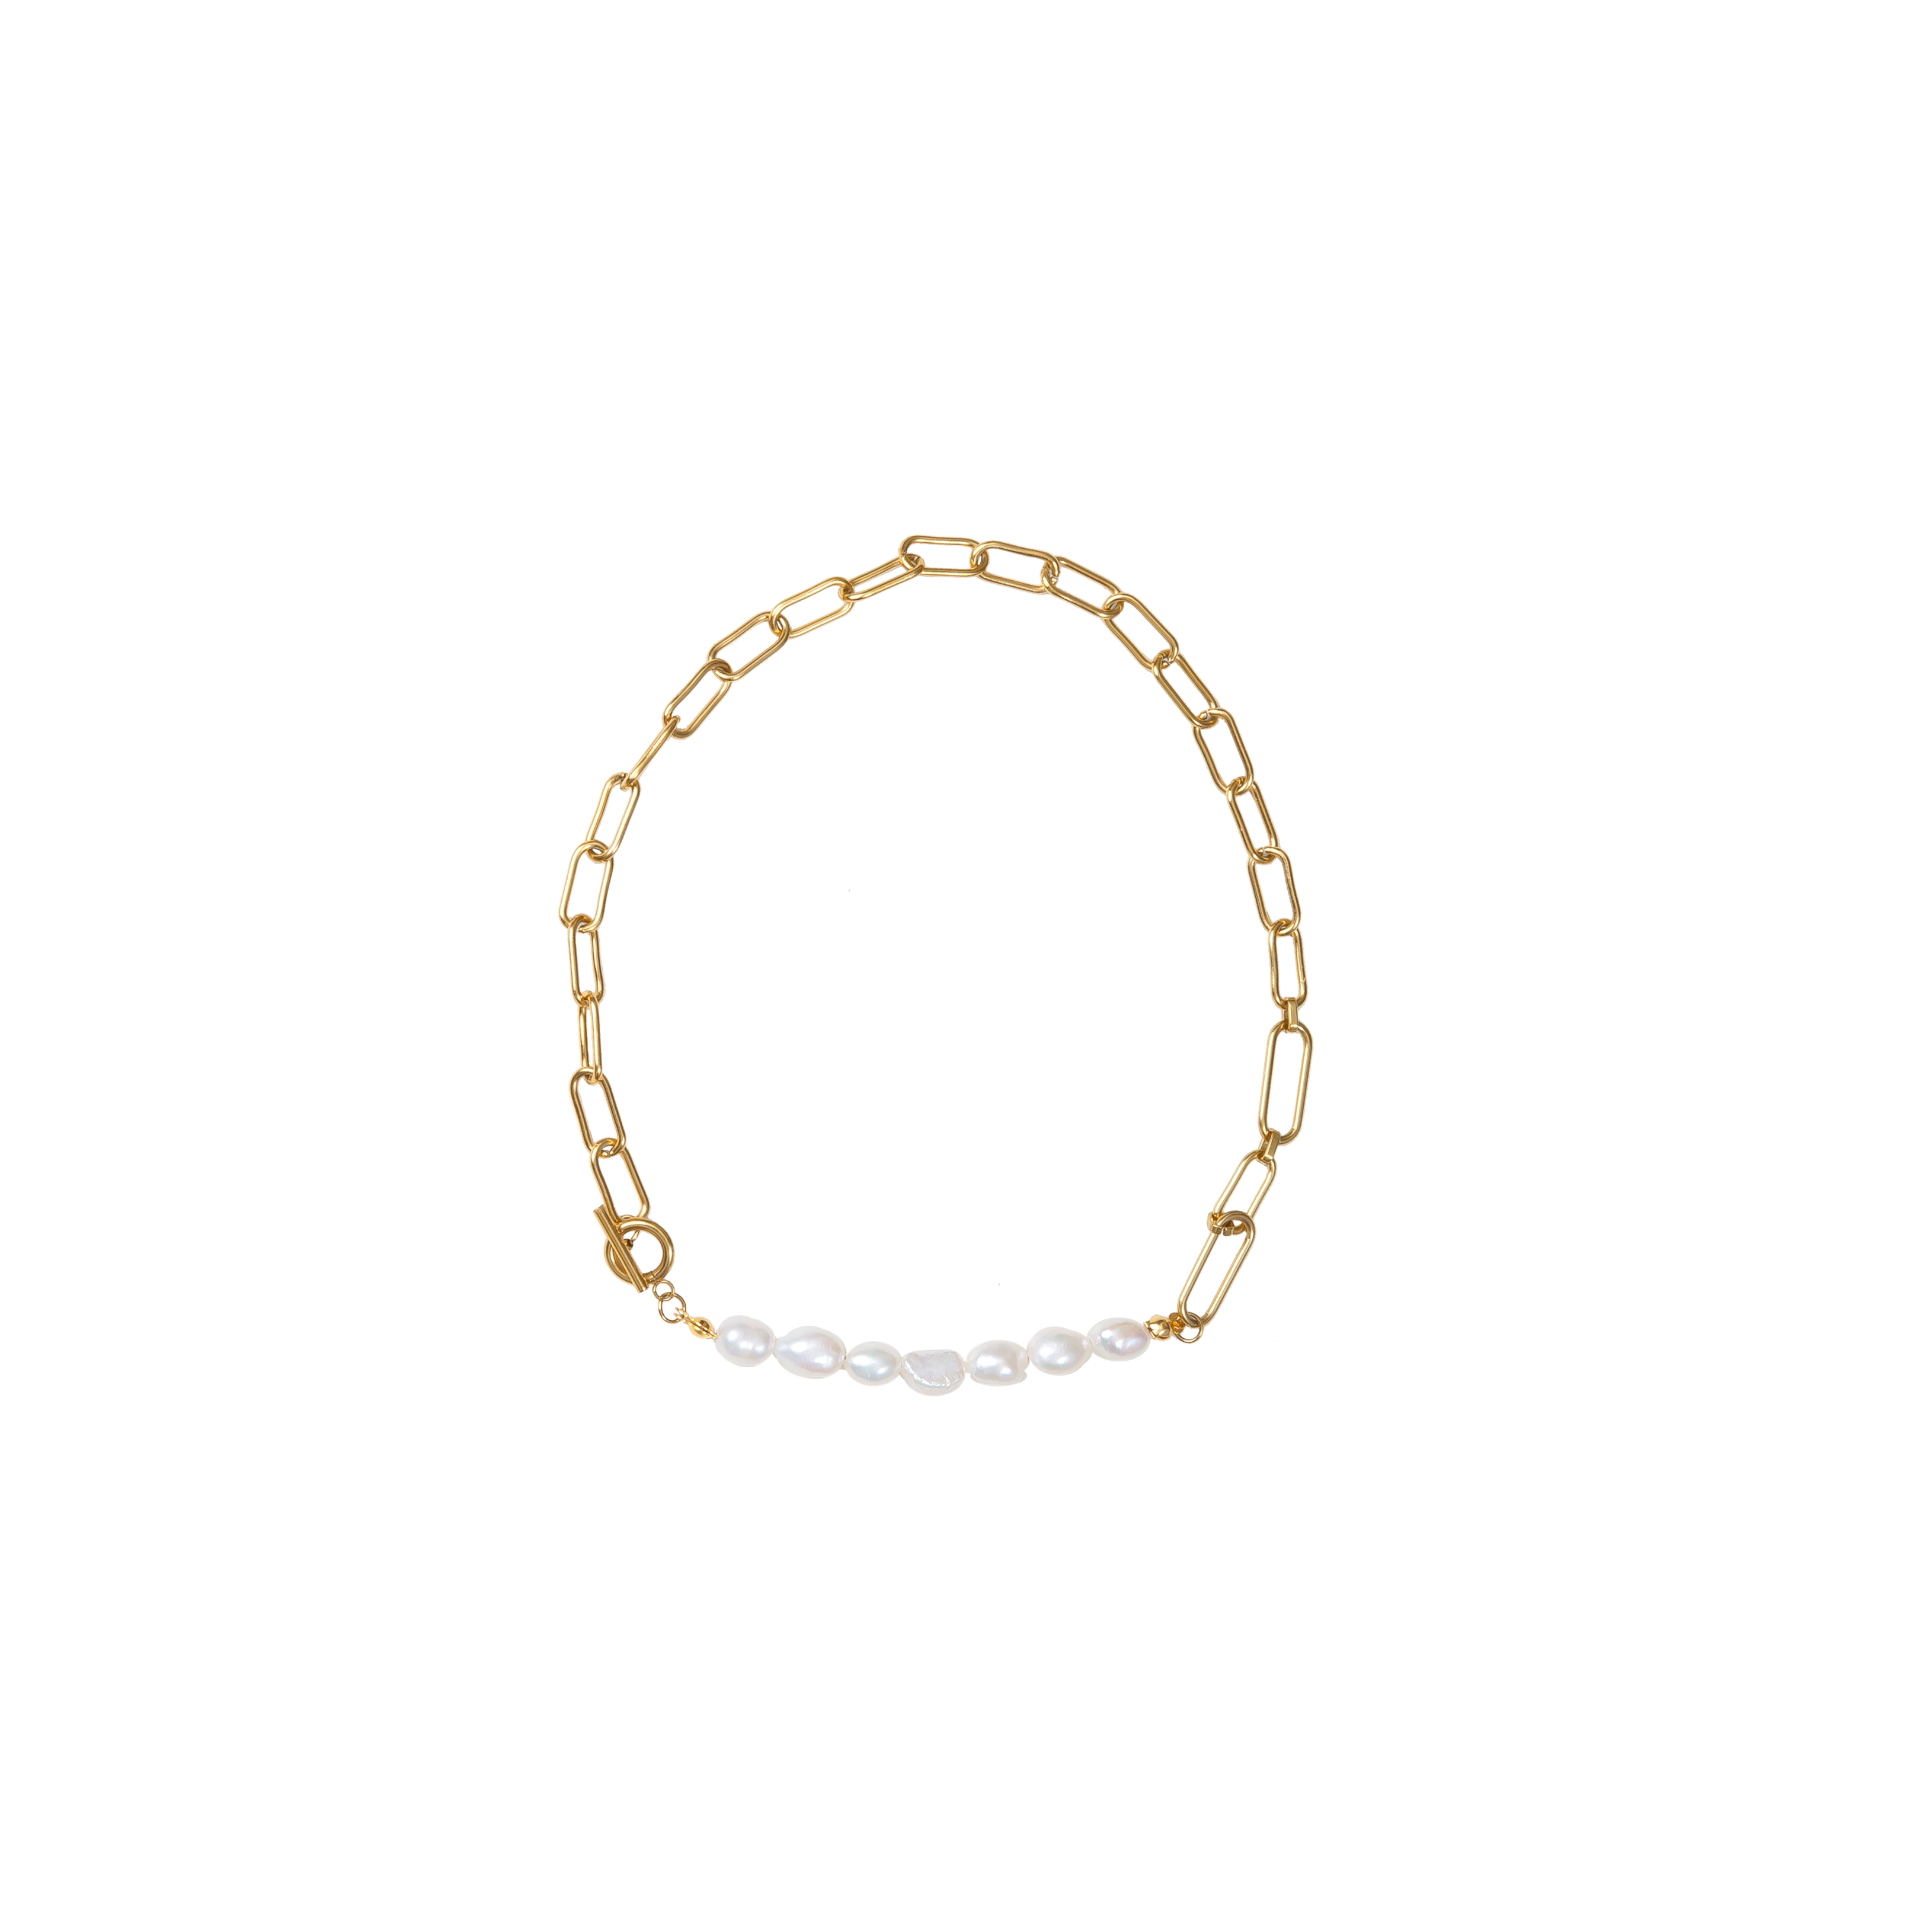 Add a touch of class to any outfit with this freshwater pearl toggle necklace. This elegant necklace gives a rich, classic look and will never go out of style.  18K gold plated on stainless steel. Length: 16”